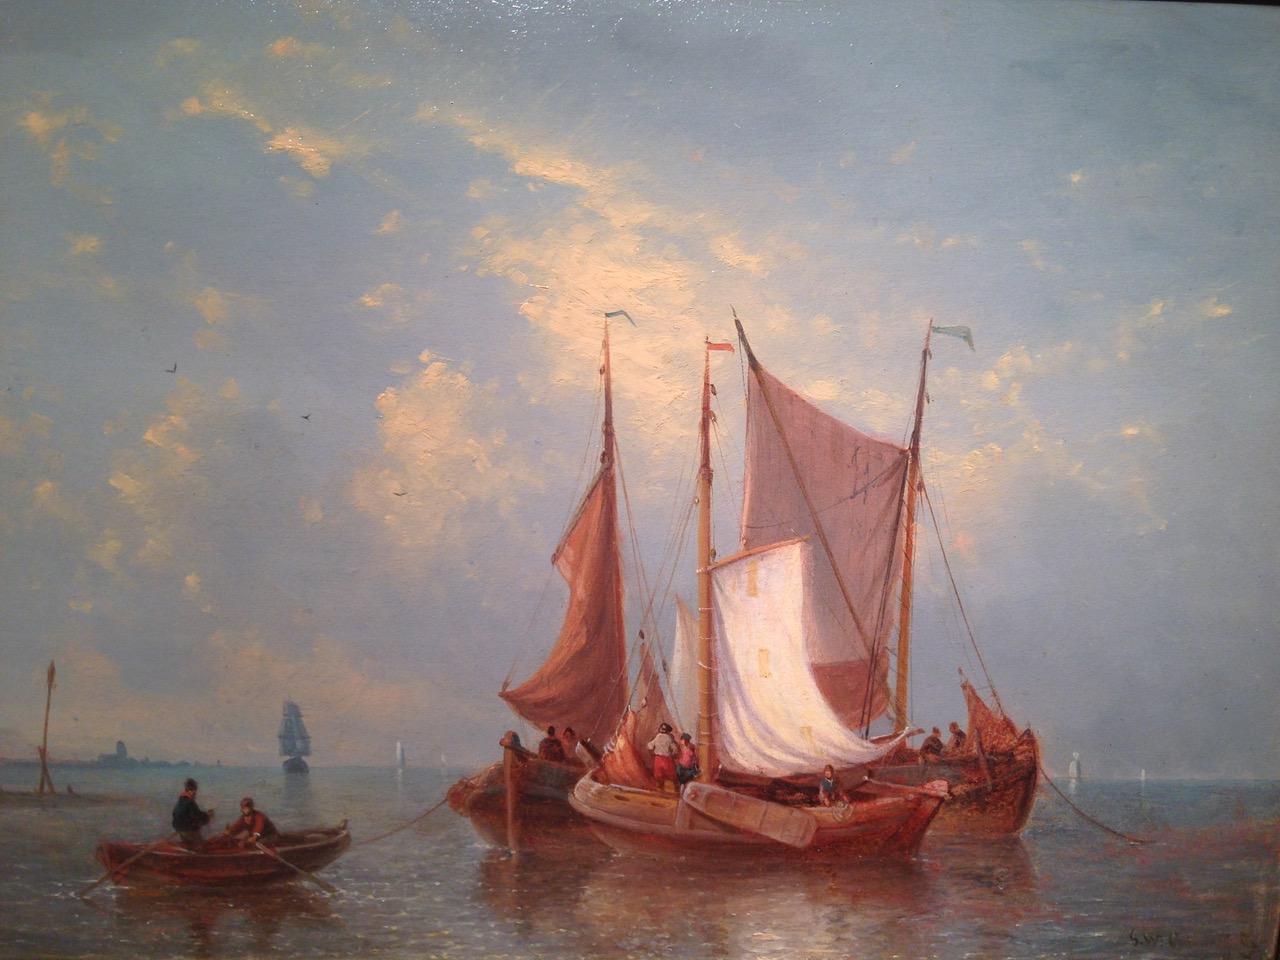 George Willem Opdenhoff Landscape Painting - Sailing Vessels in Calm Seas Offshore - Sailboat Sail Boat 19th cent oil/panel 